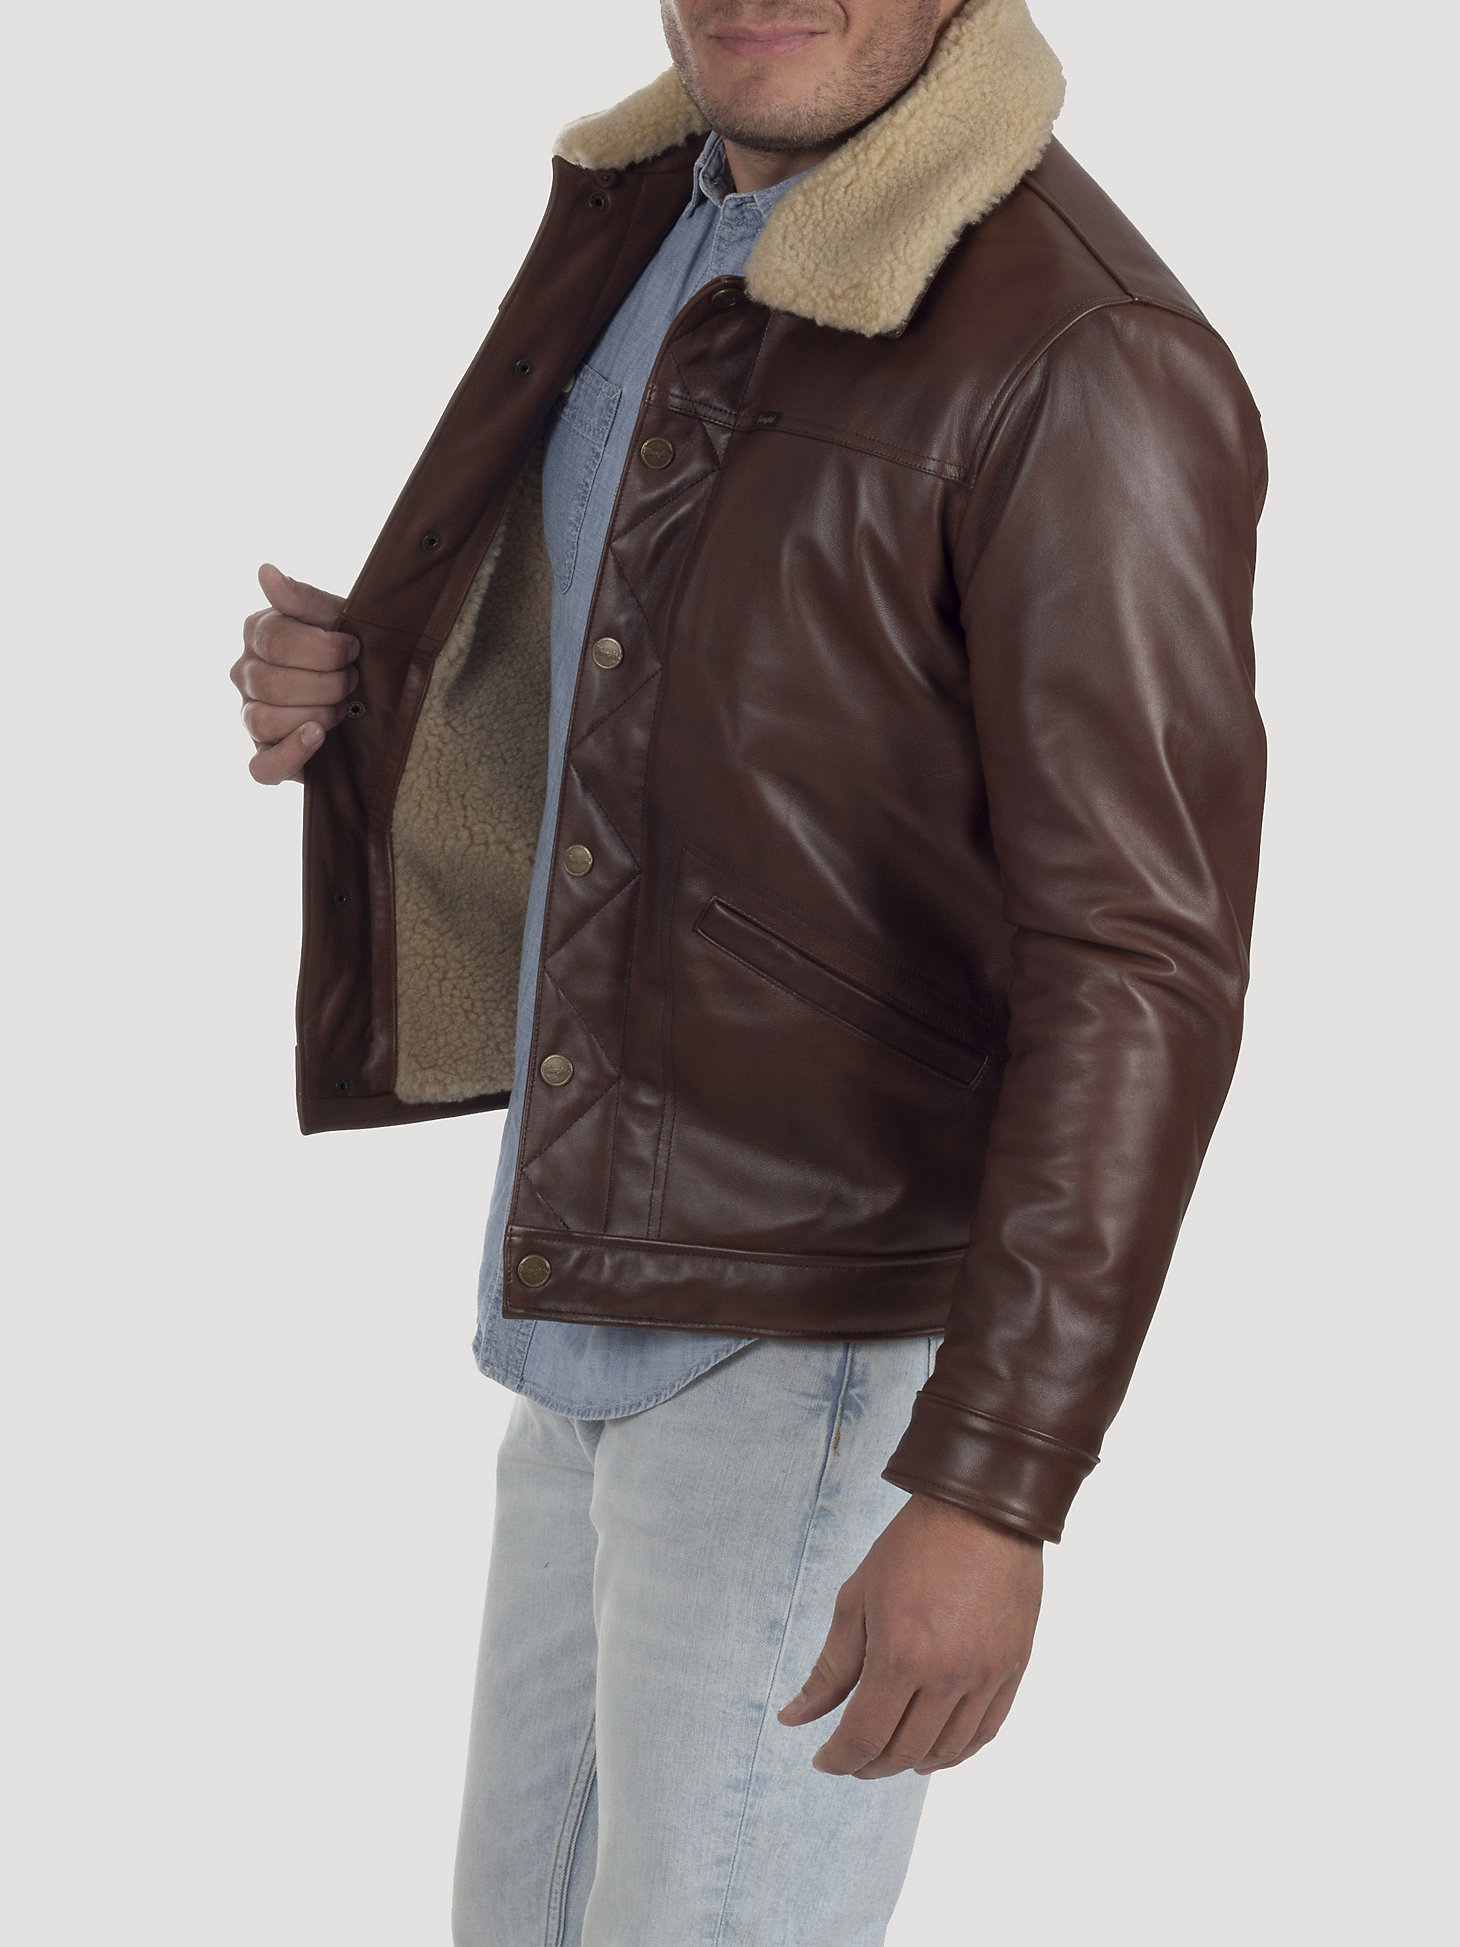 Men's Leather Sherpa Bomber Jacket in Brown alternative view 1